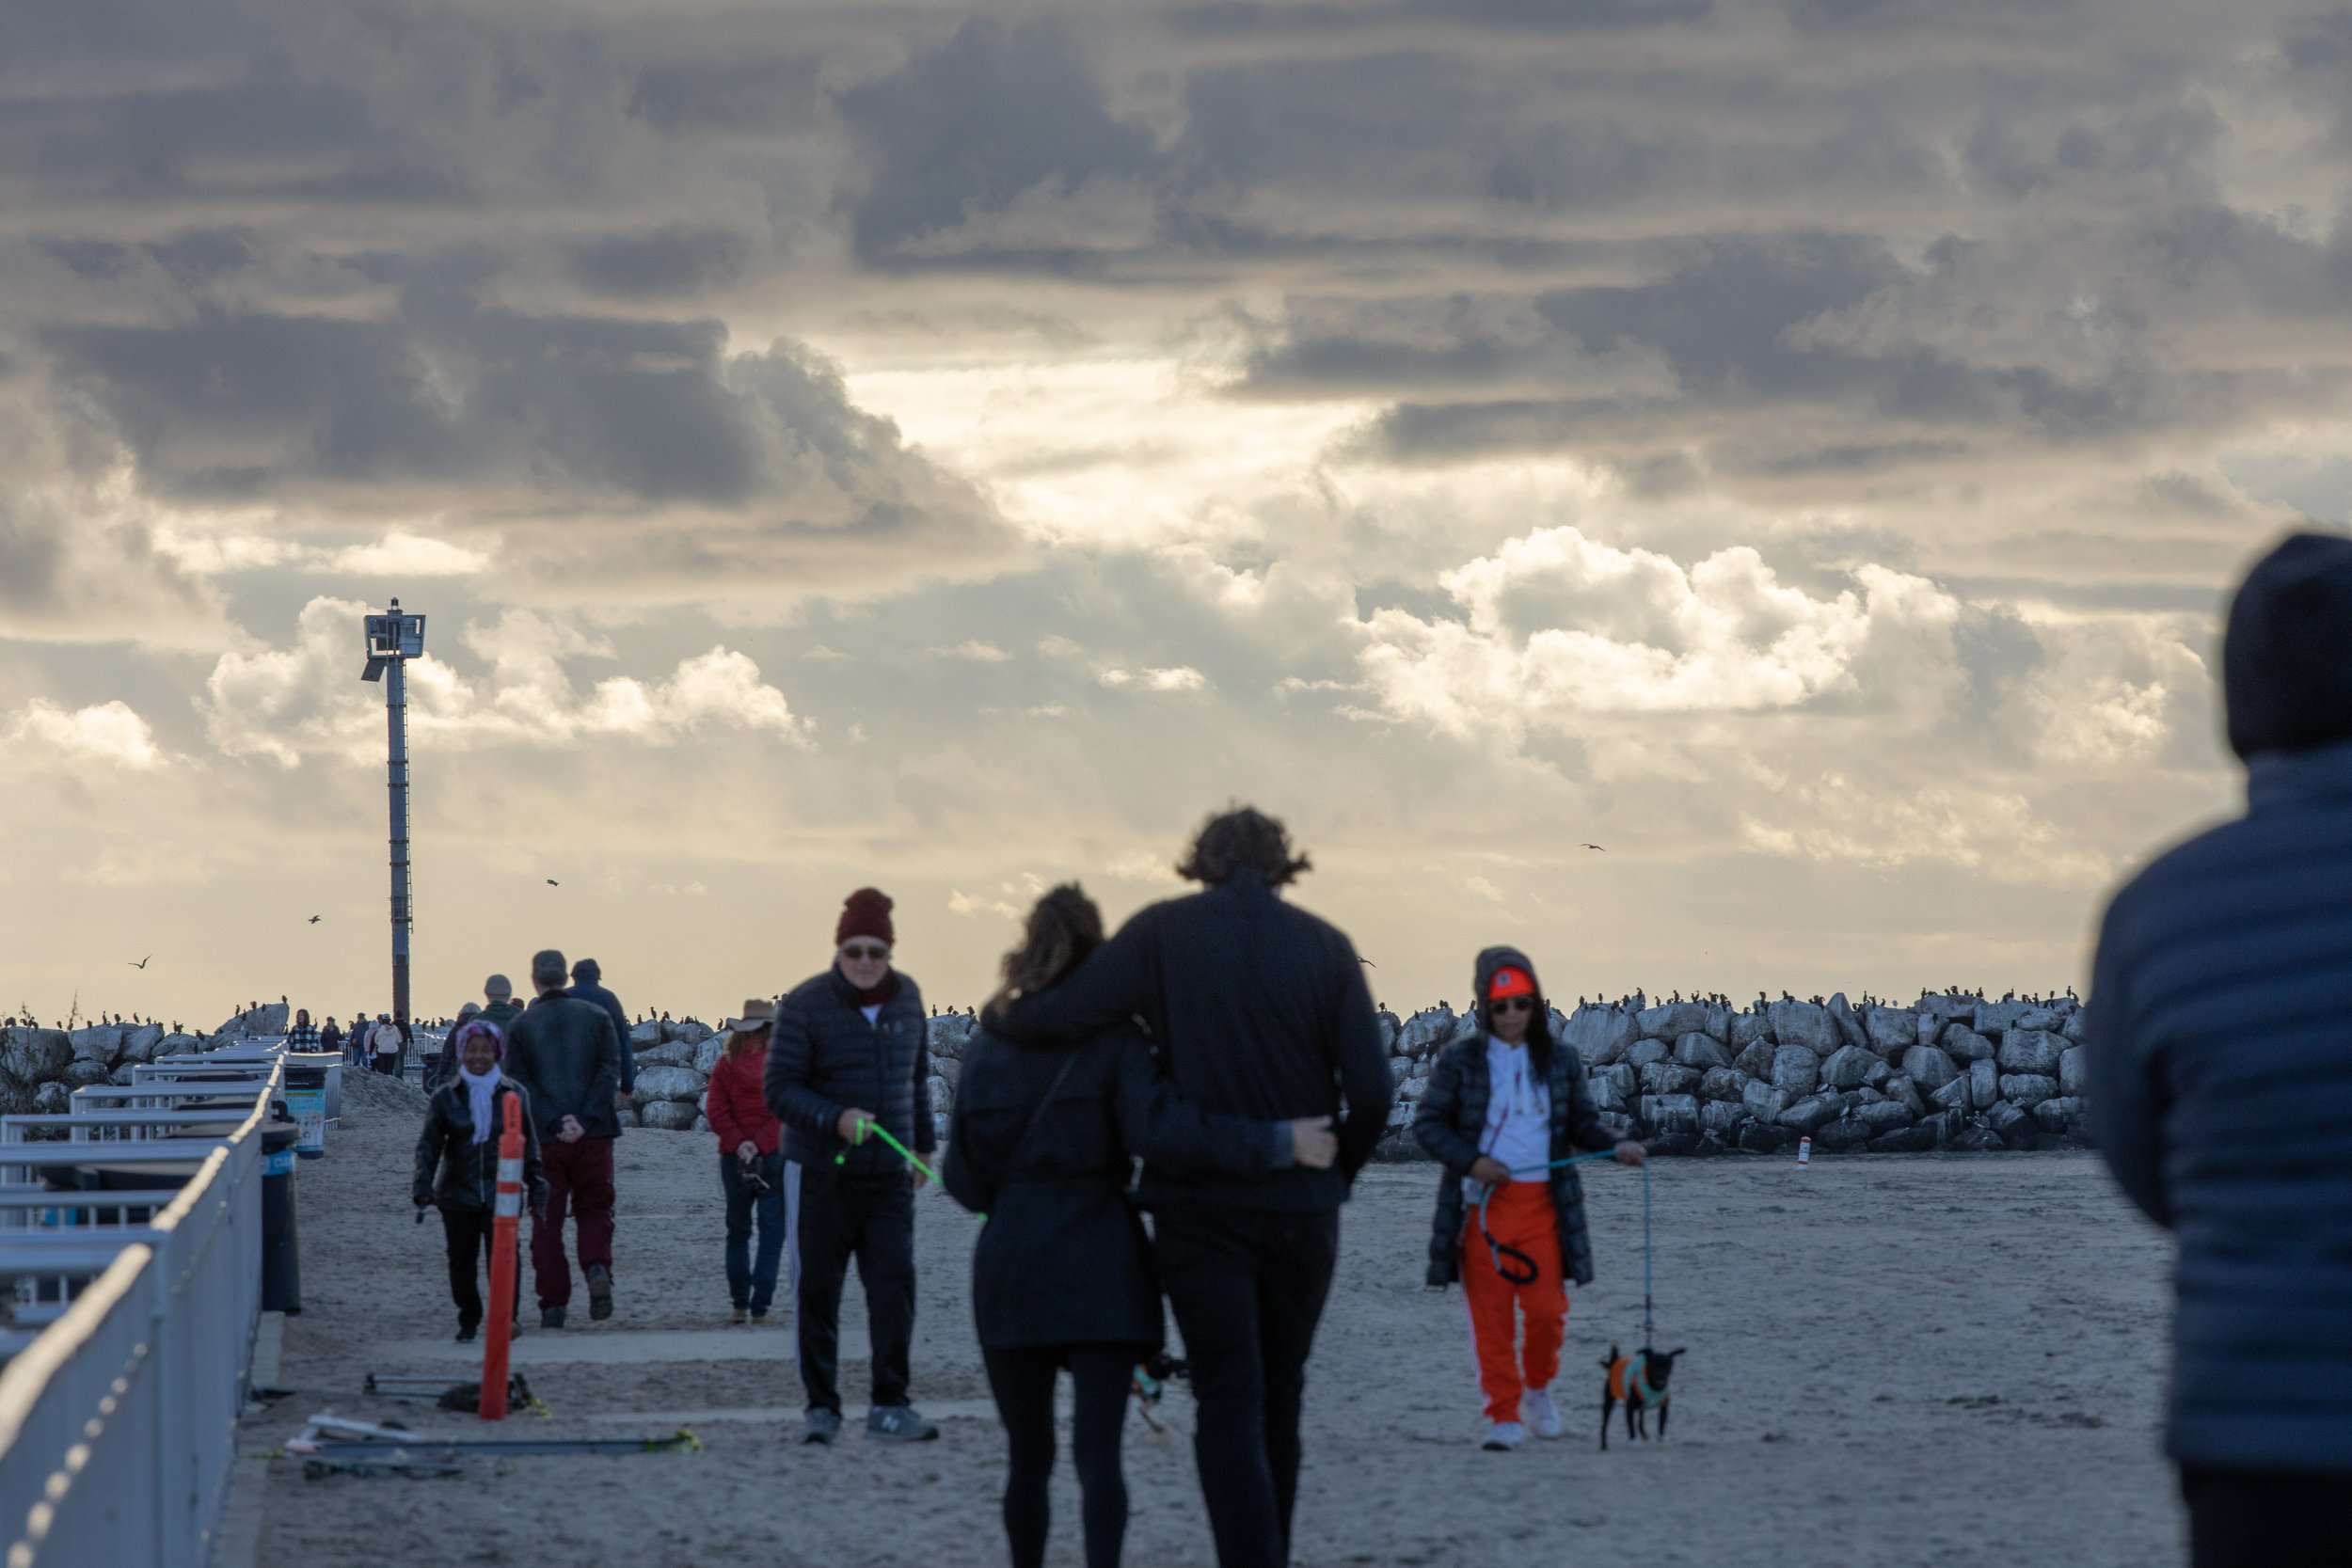  After heavy rain and thunder a the day before due to the strong weather front affecting the State. People going for strolls to the beach on February Sunday 26 at Marina del Rey, Calif. (Jorge Devotto | The Corsair) 